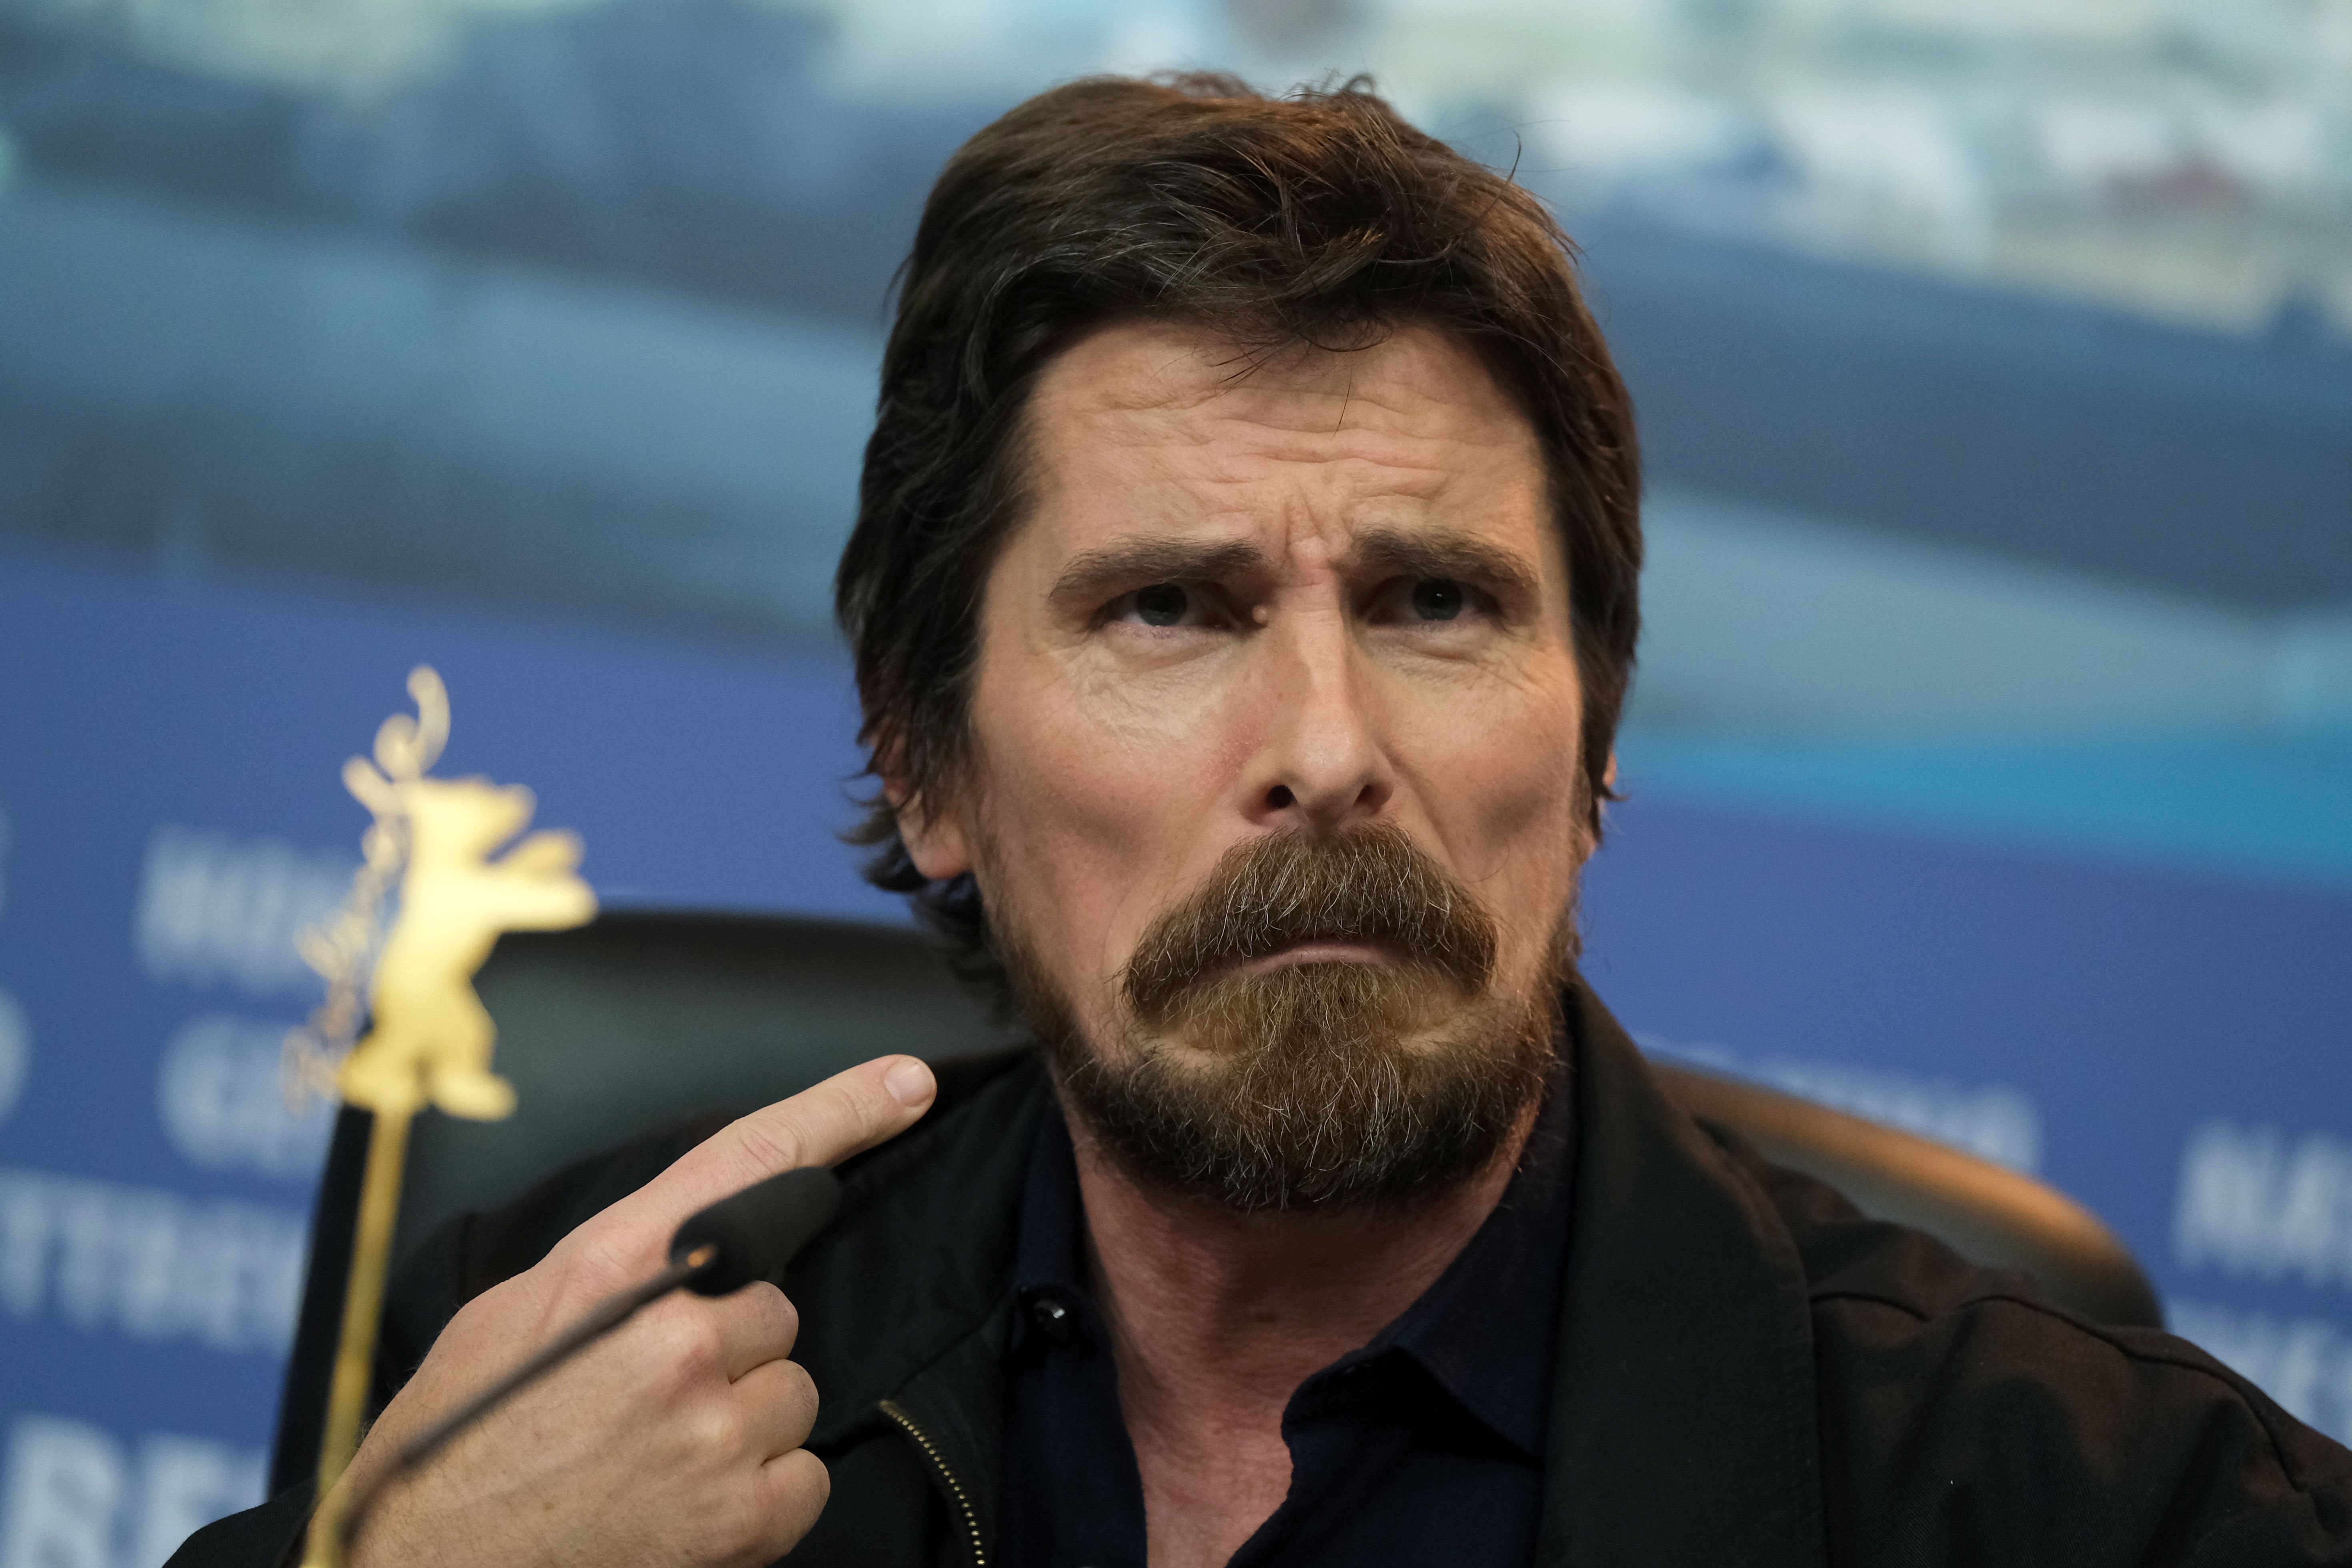 Christian Bale during the "Vice" (Vice - Der zweite Mann) press conference at Grand Hyatt Hotel on February 11, 2019 in Berlin, Germany. | Source: Getty Images